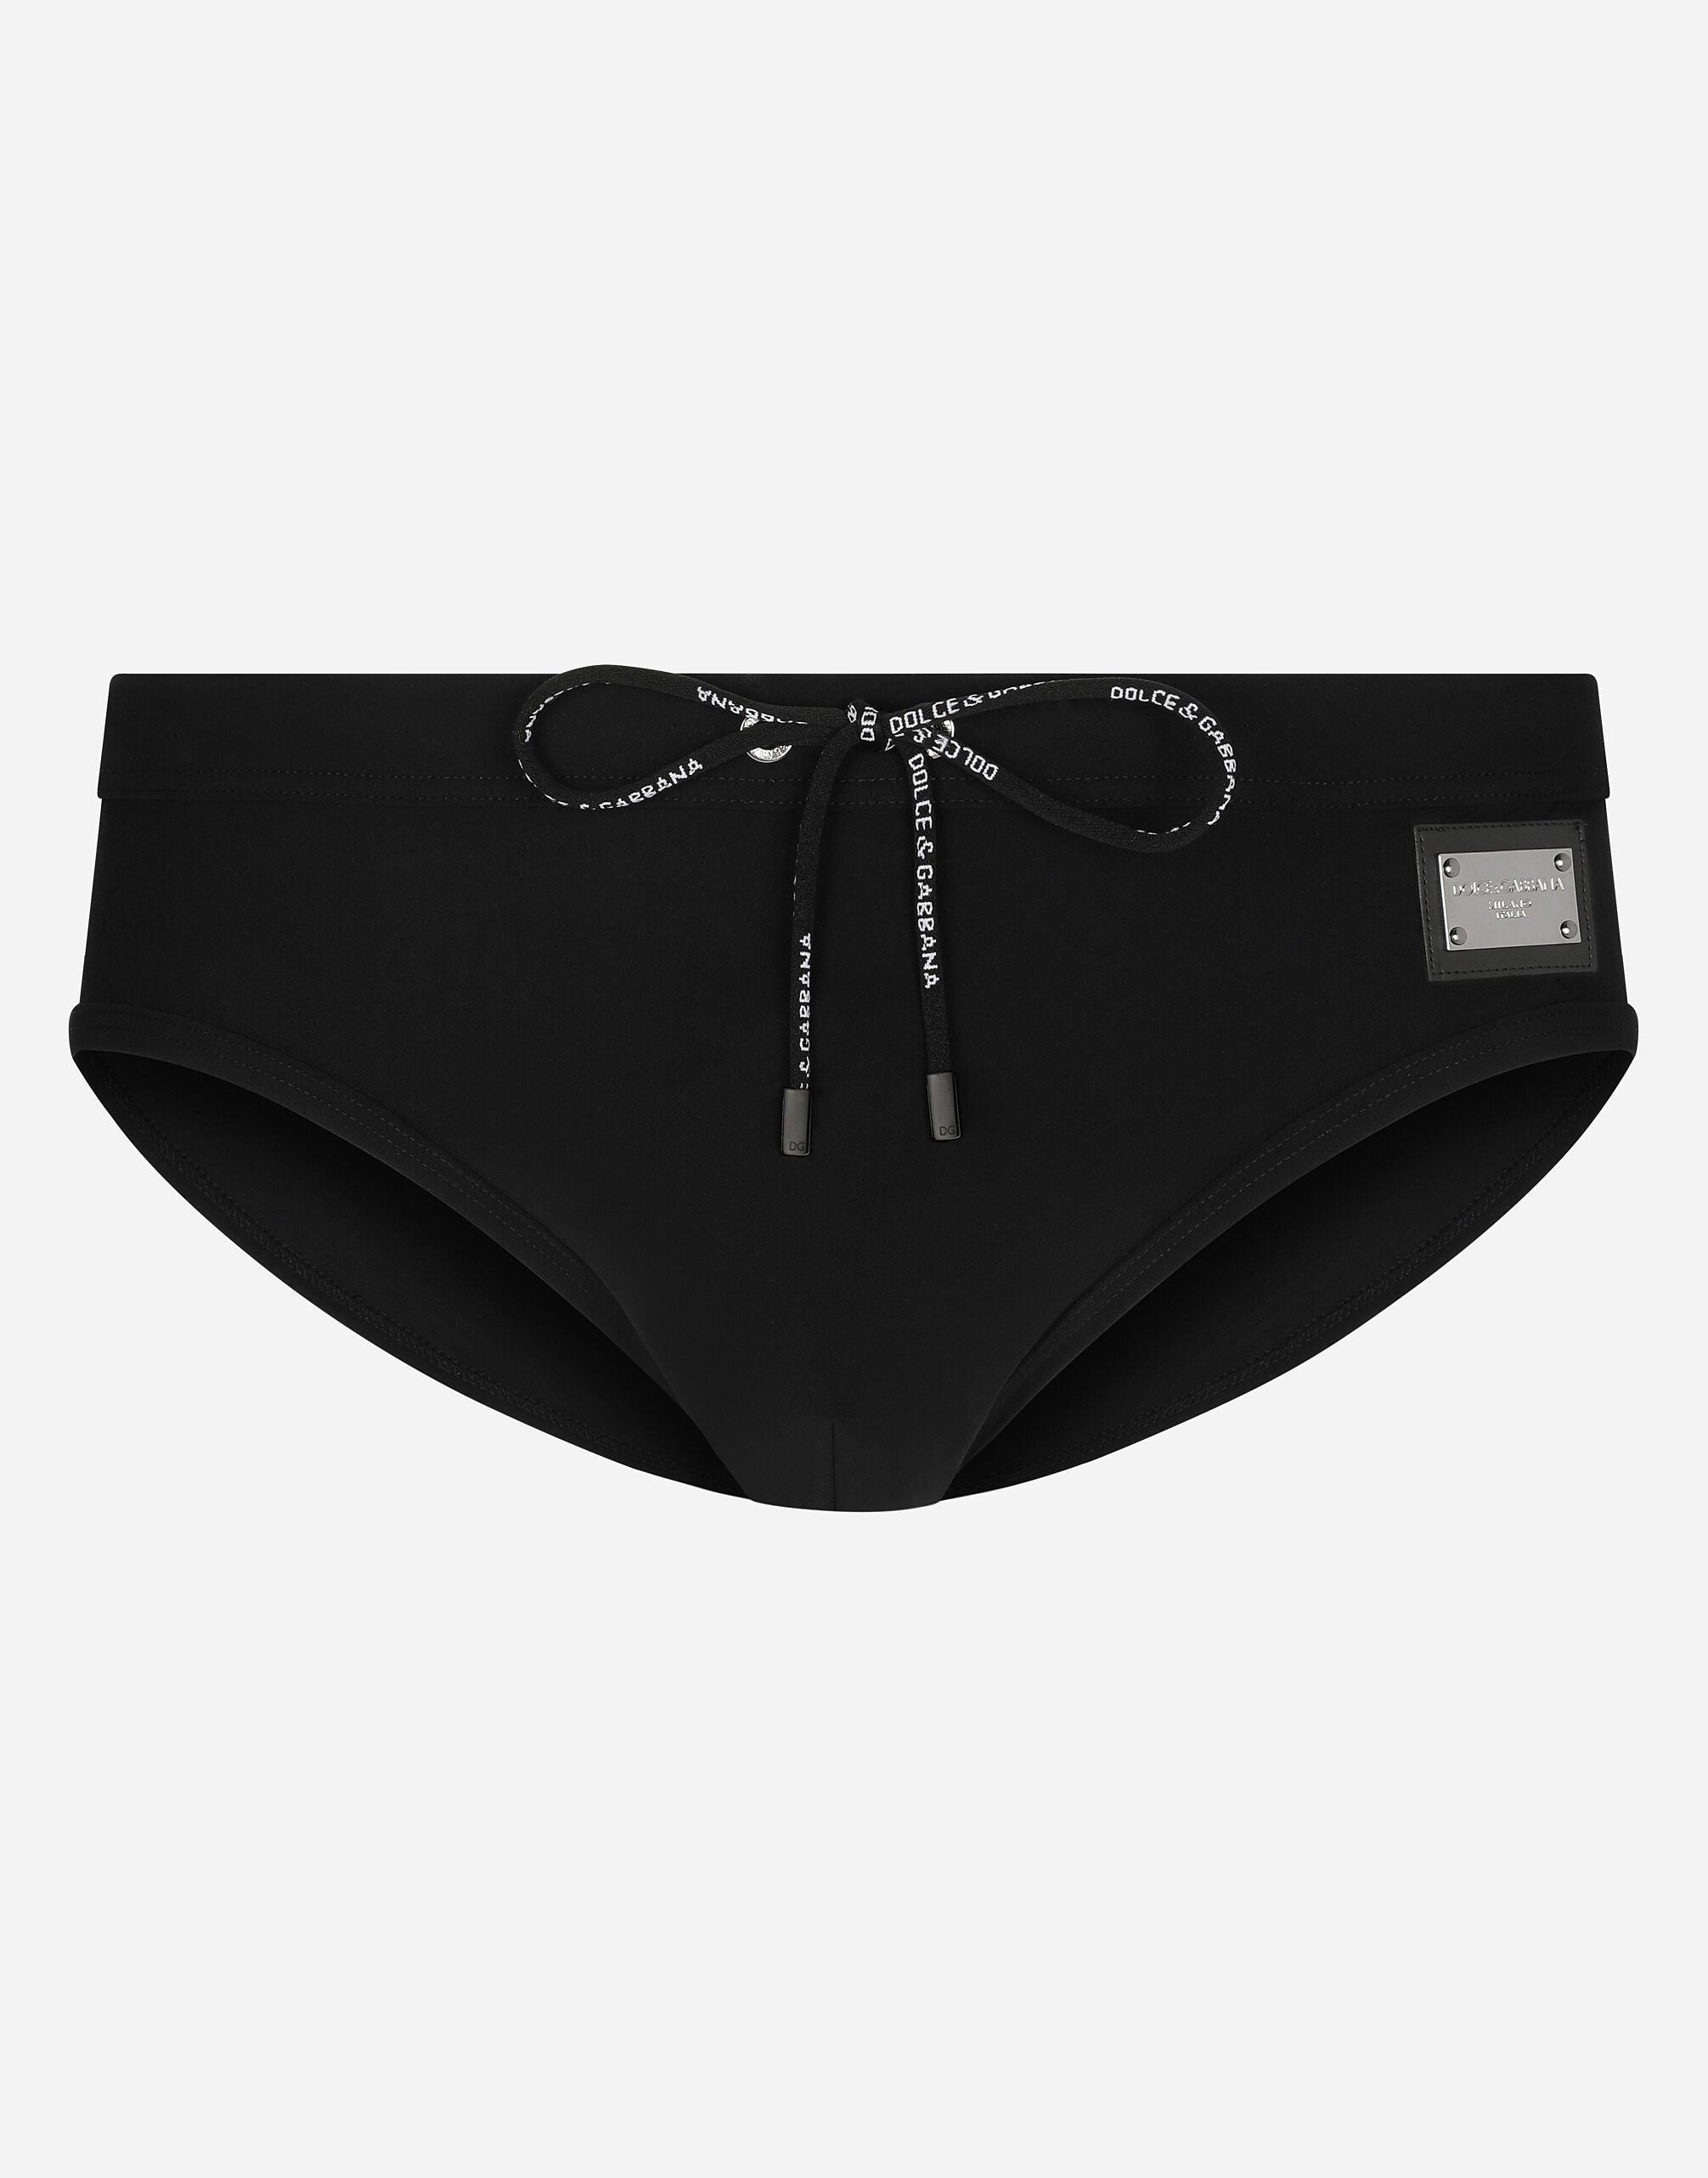 Dolce & Gabbana Swim briefs with high-cut leg and branded tag Print M4A13TISMF5